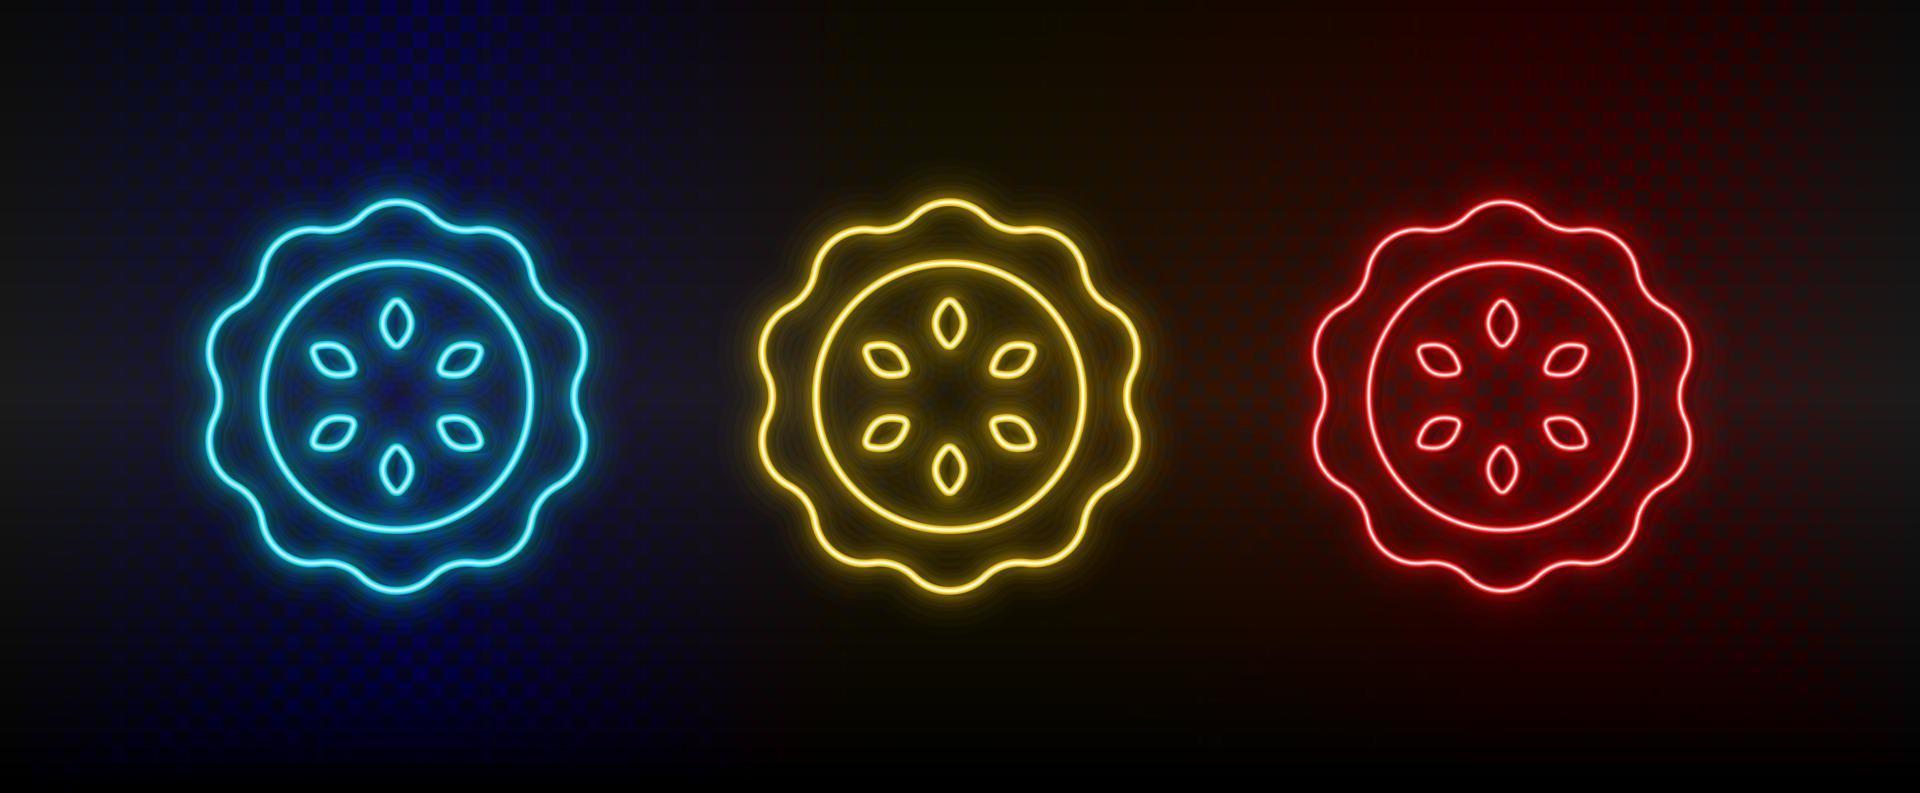 Neon icon set biscuit. Set of red, blue, yellow neon vector icon on dark background